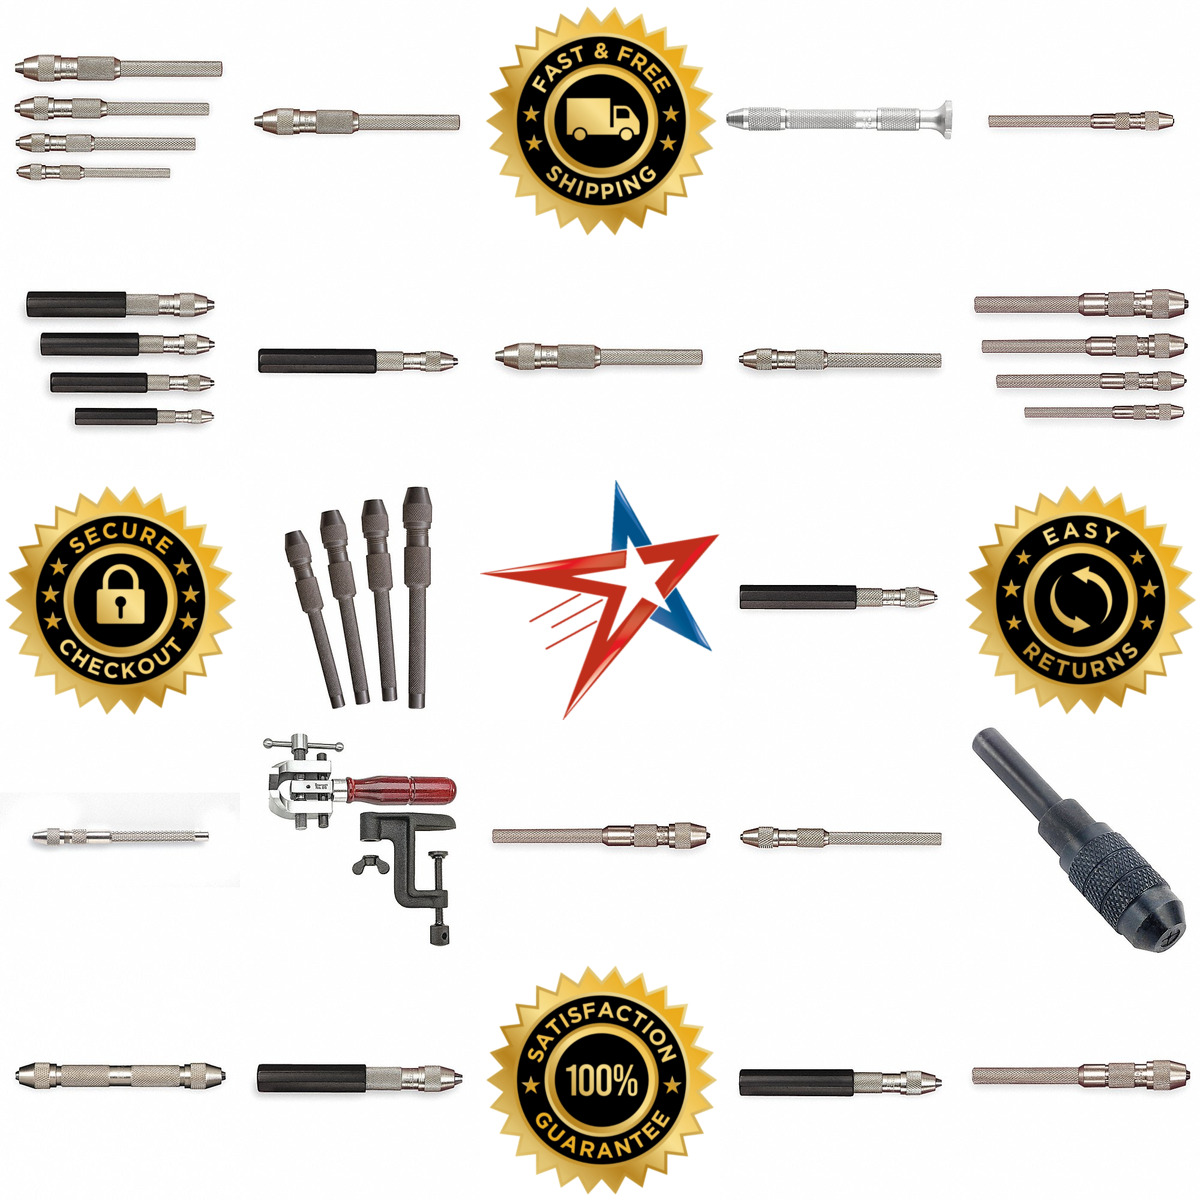 A selection of Pin Vises and Sets products on GoVets